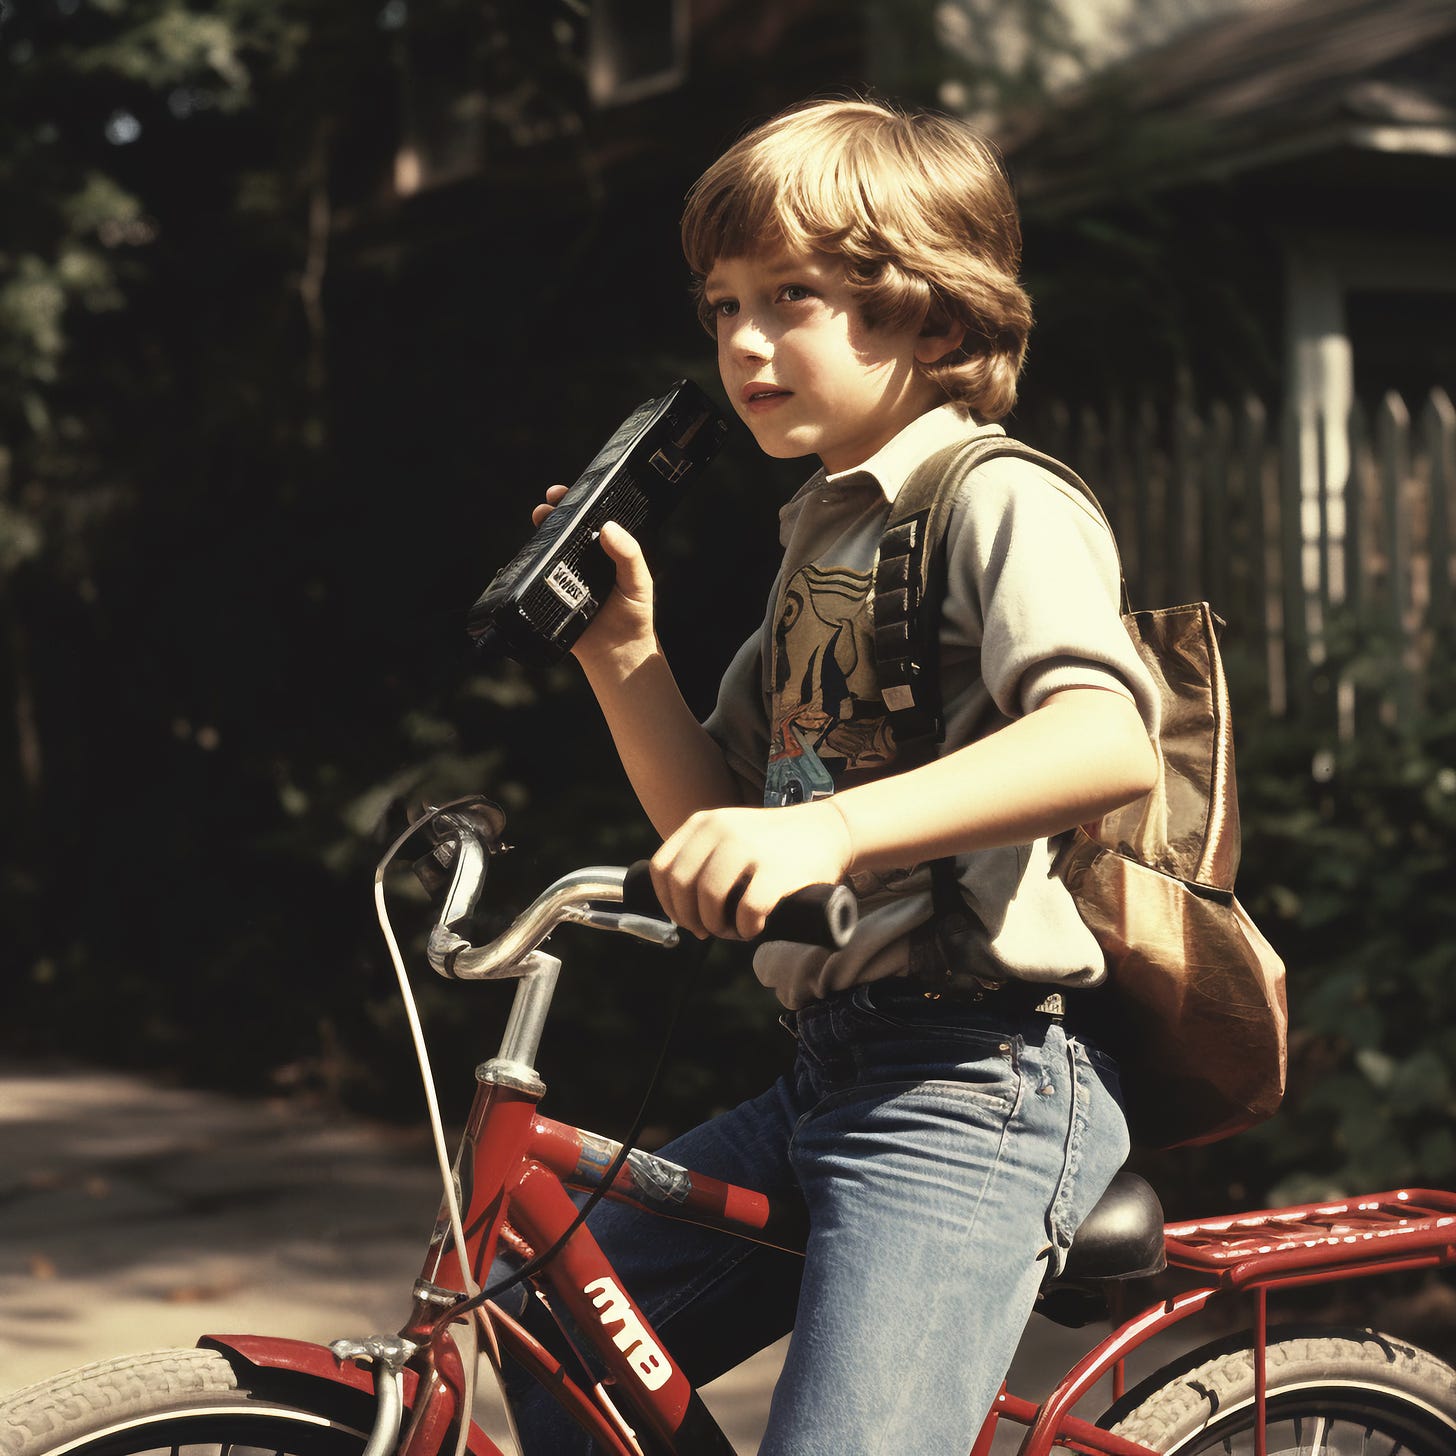 An aI generated image of a kid on a bike with what looks like a radio in his hand.